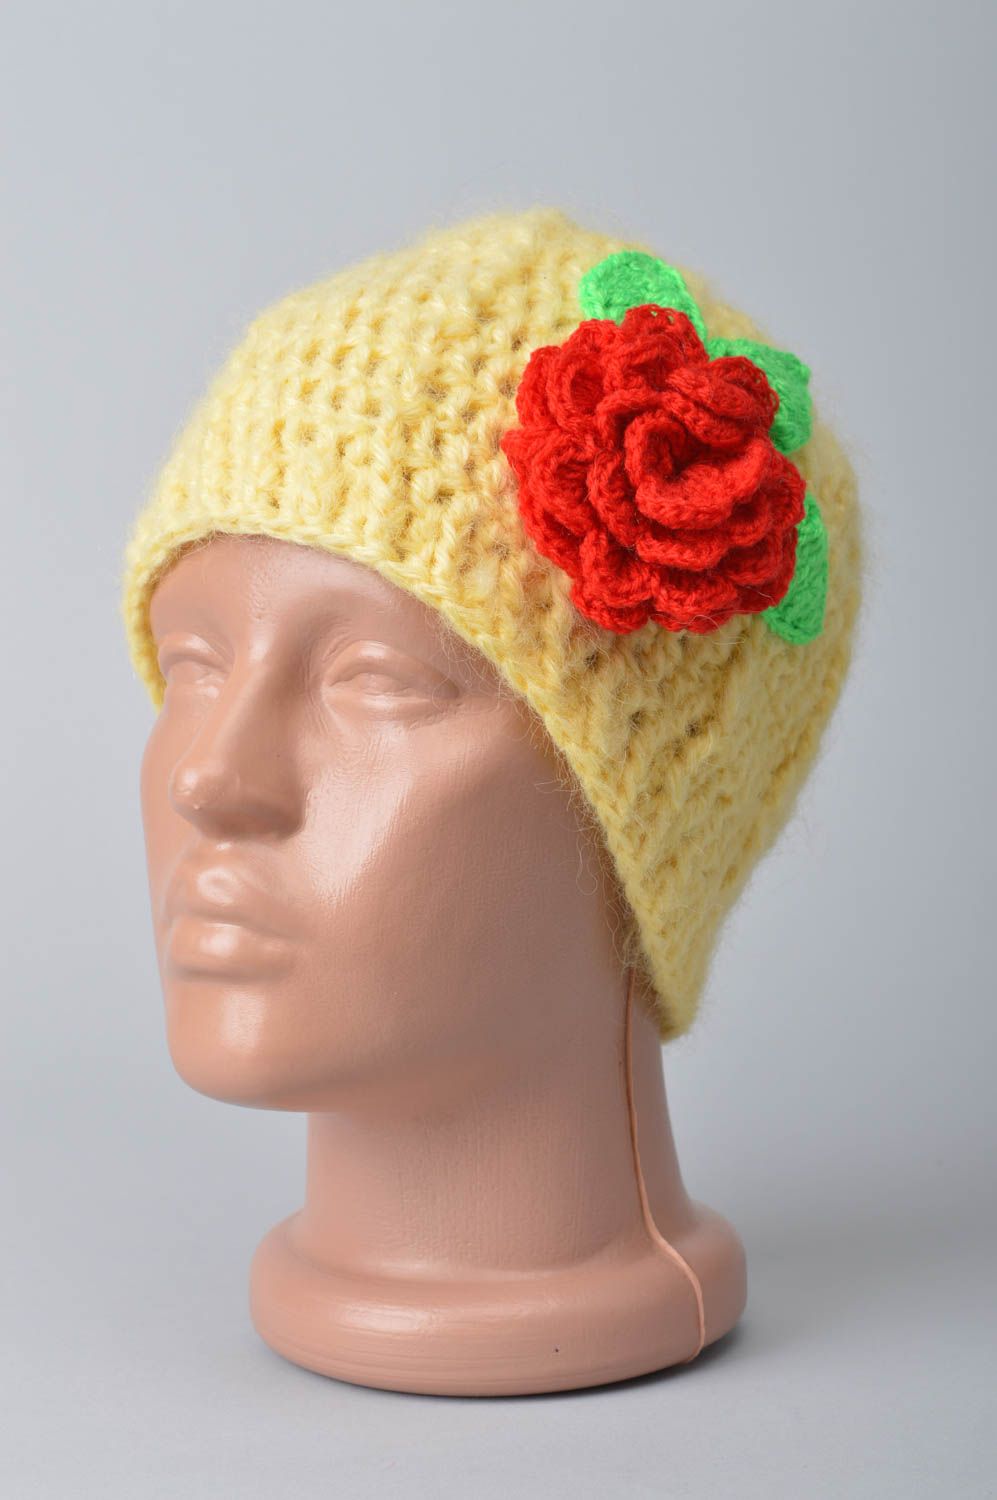 Unusual handmade crochet hat fashion accessories crochet ideas gifts for her photo 1